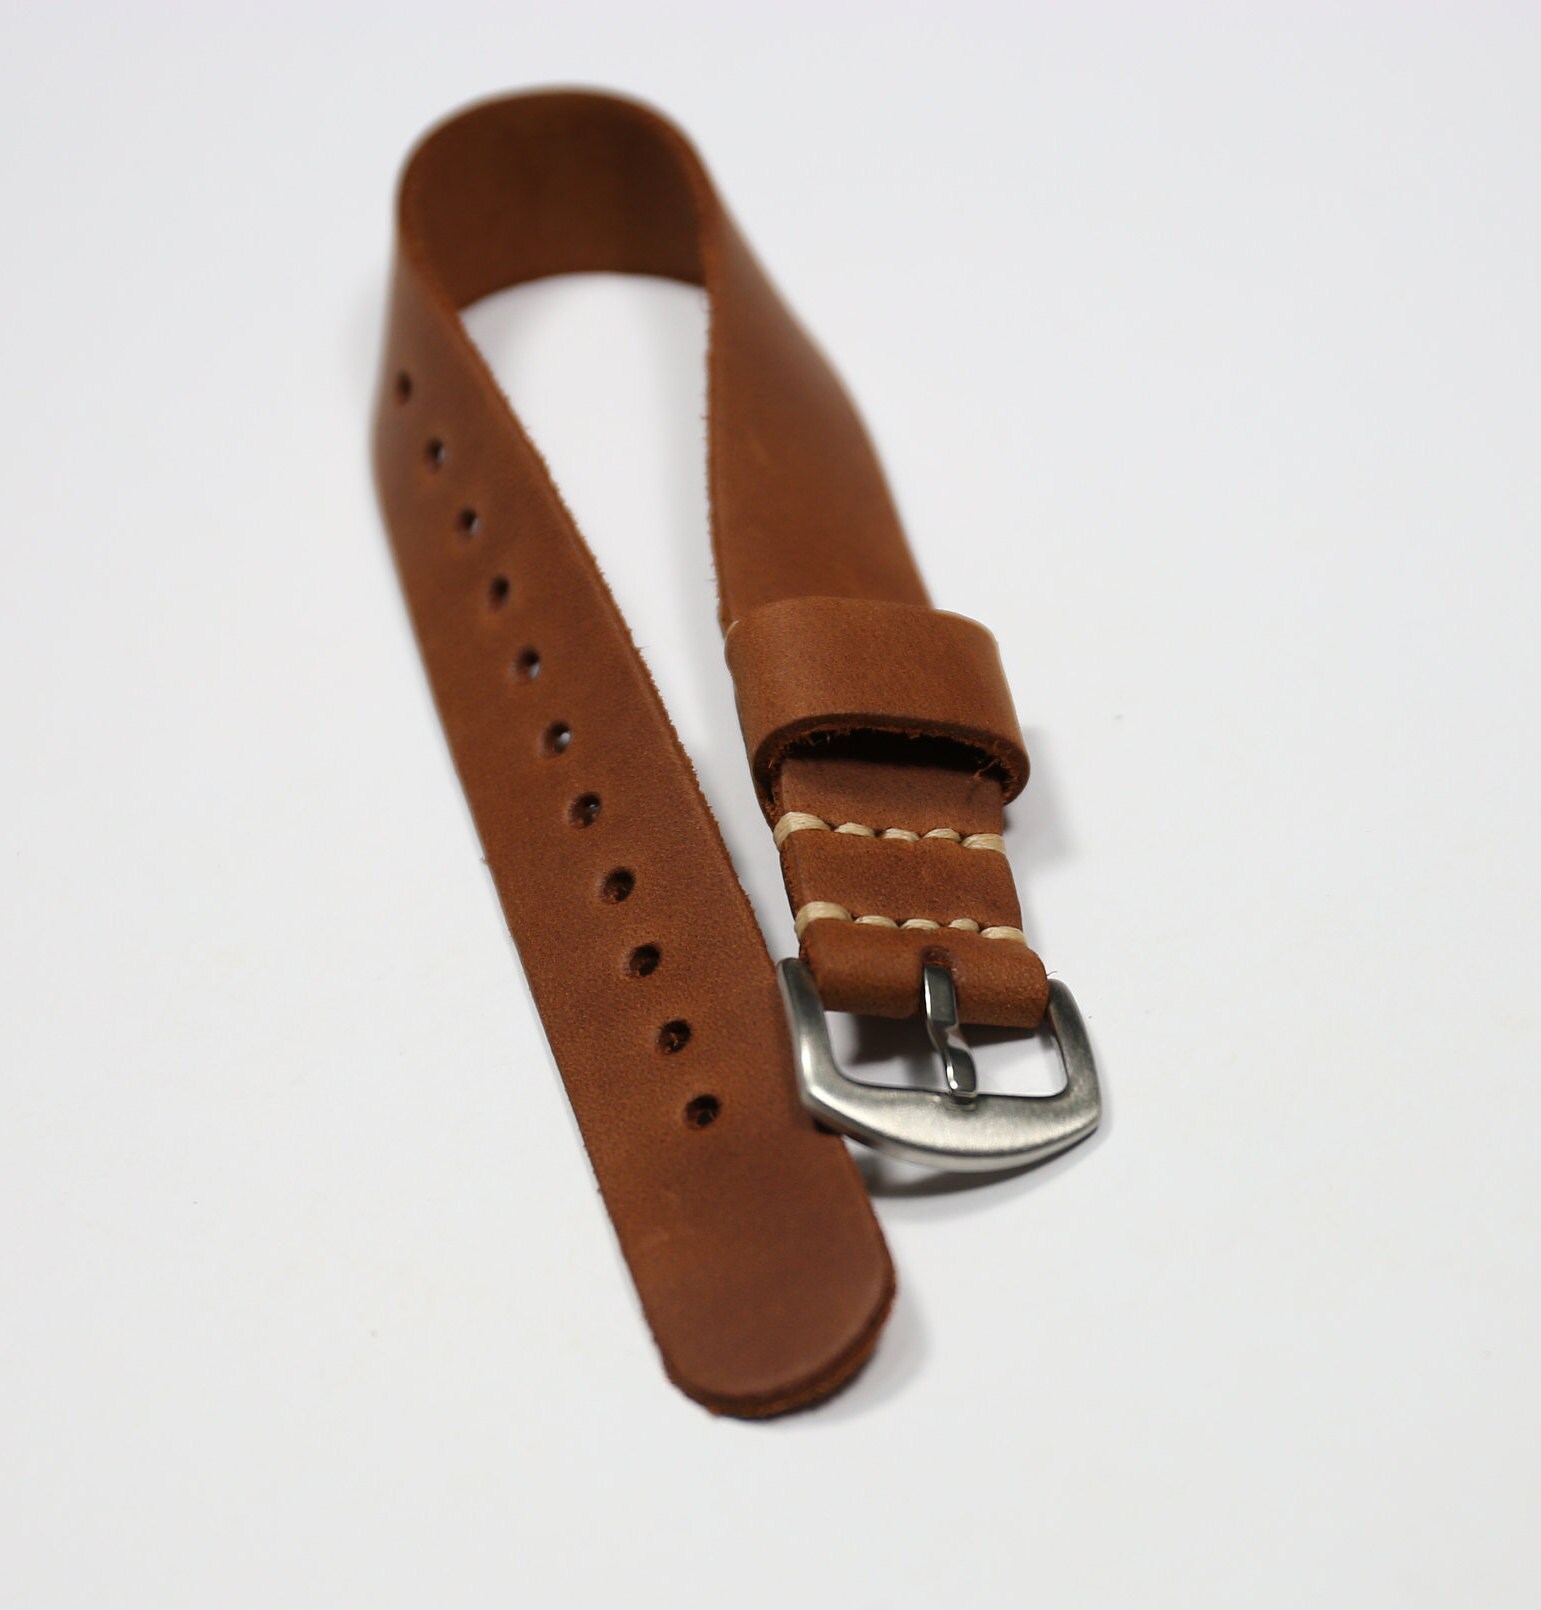 Watch band leather 18-20-22-24mm One-piece brown strap length | Etsy